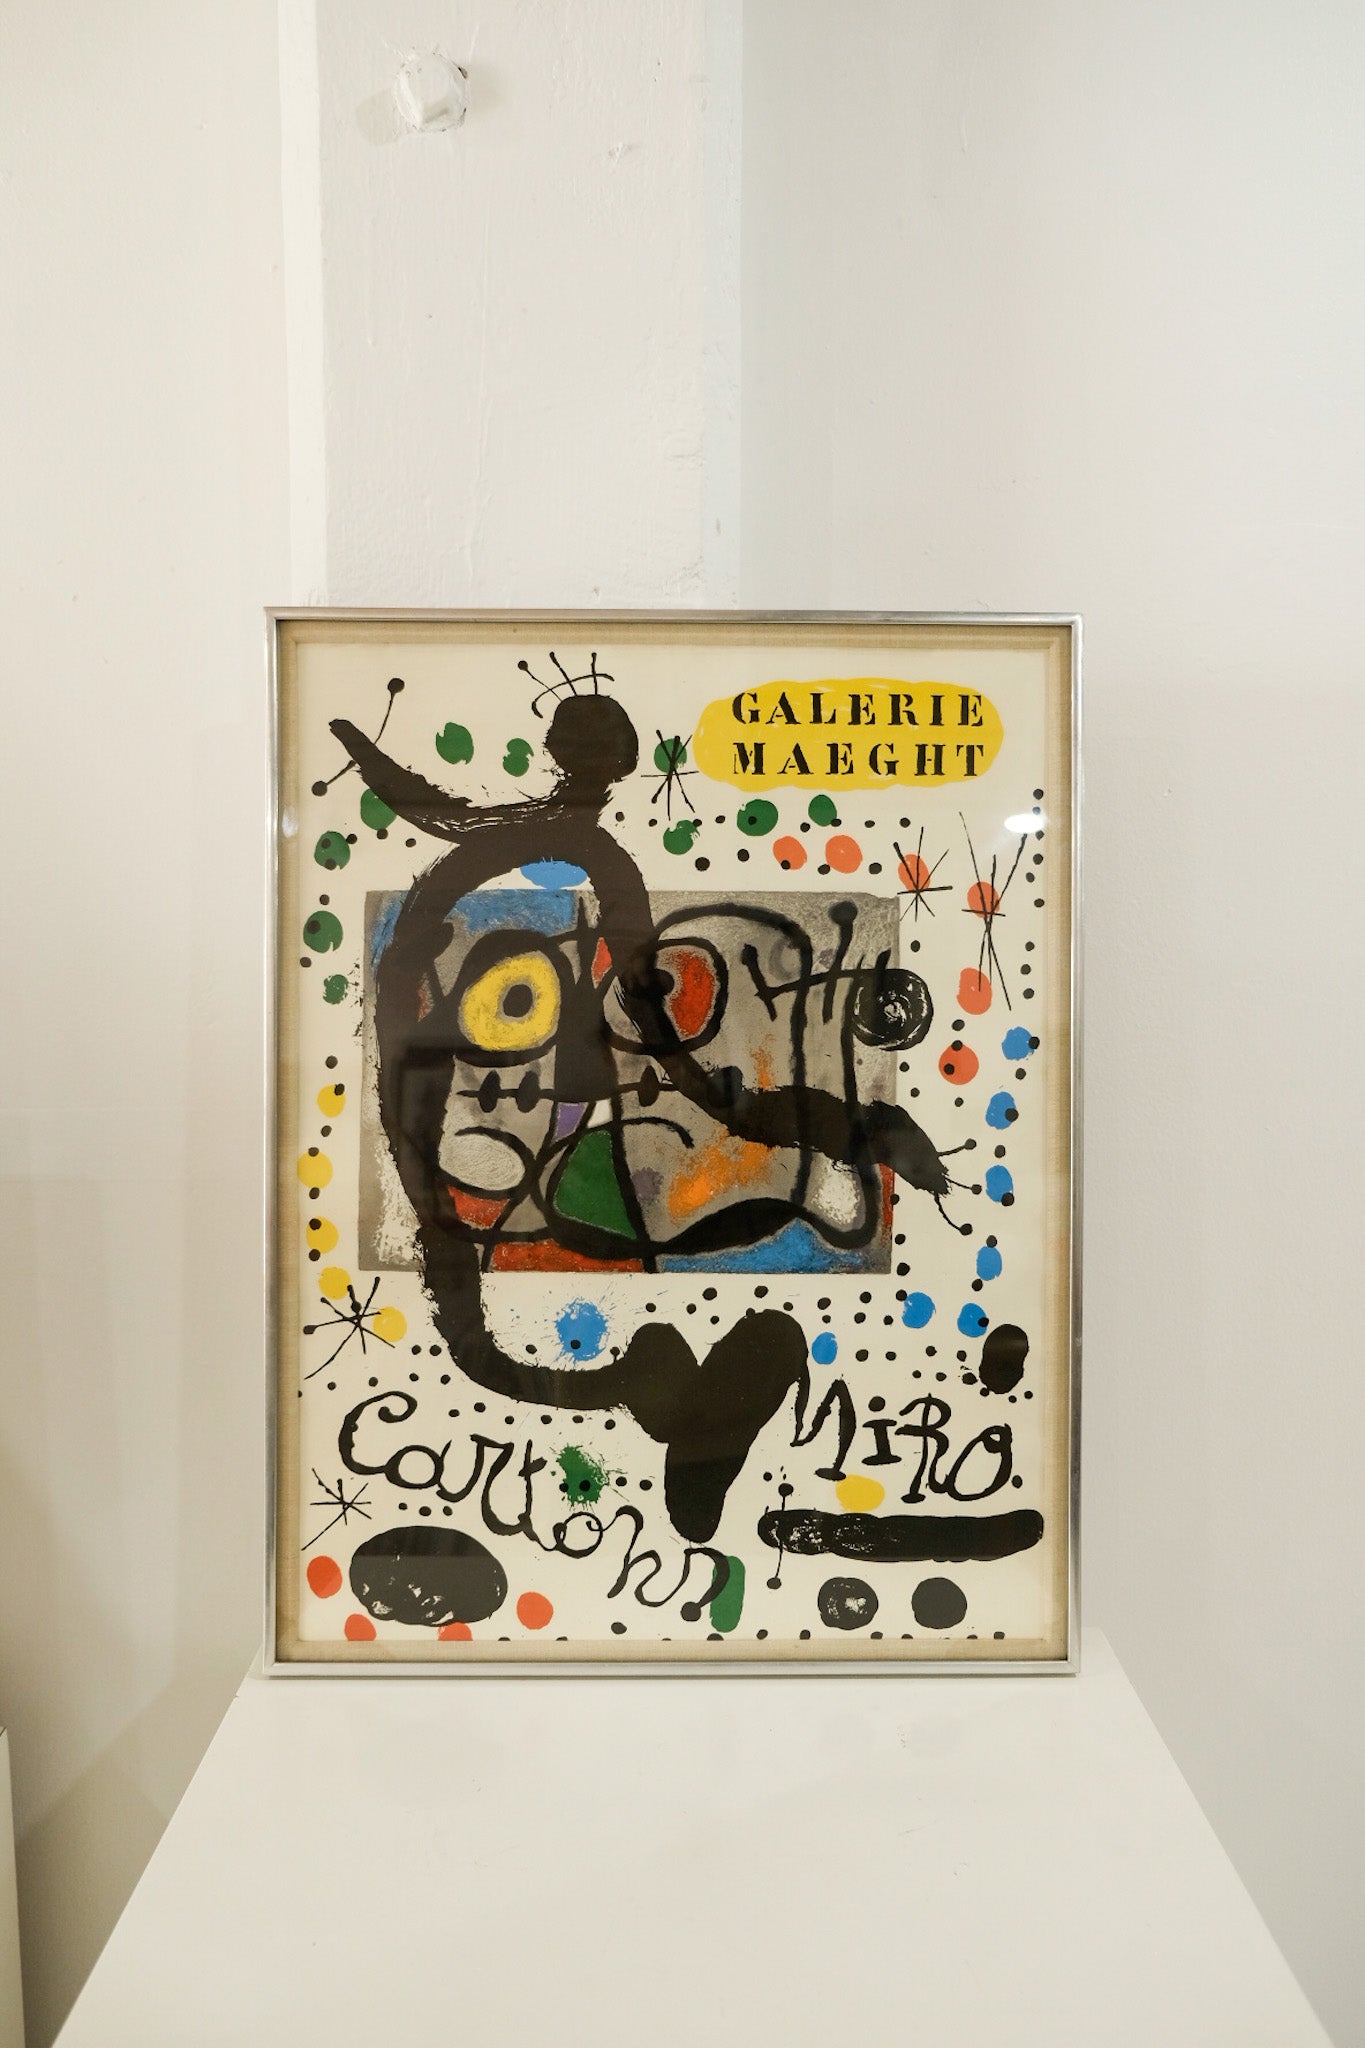 Joan Miro Galerie Maeght Lithographic Exhibition Framed Print